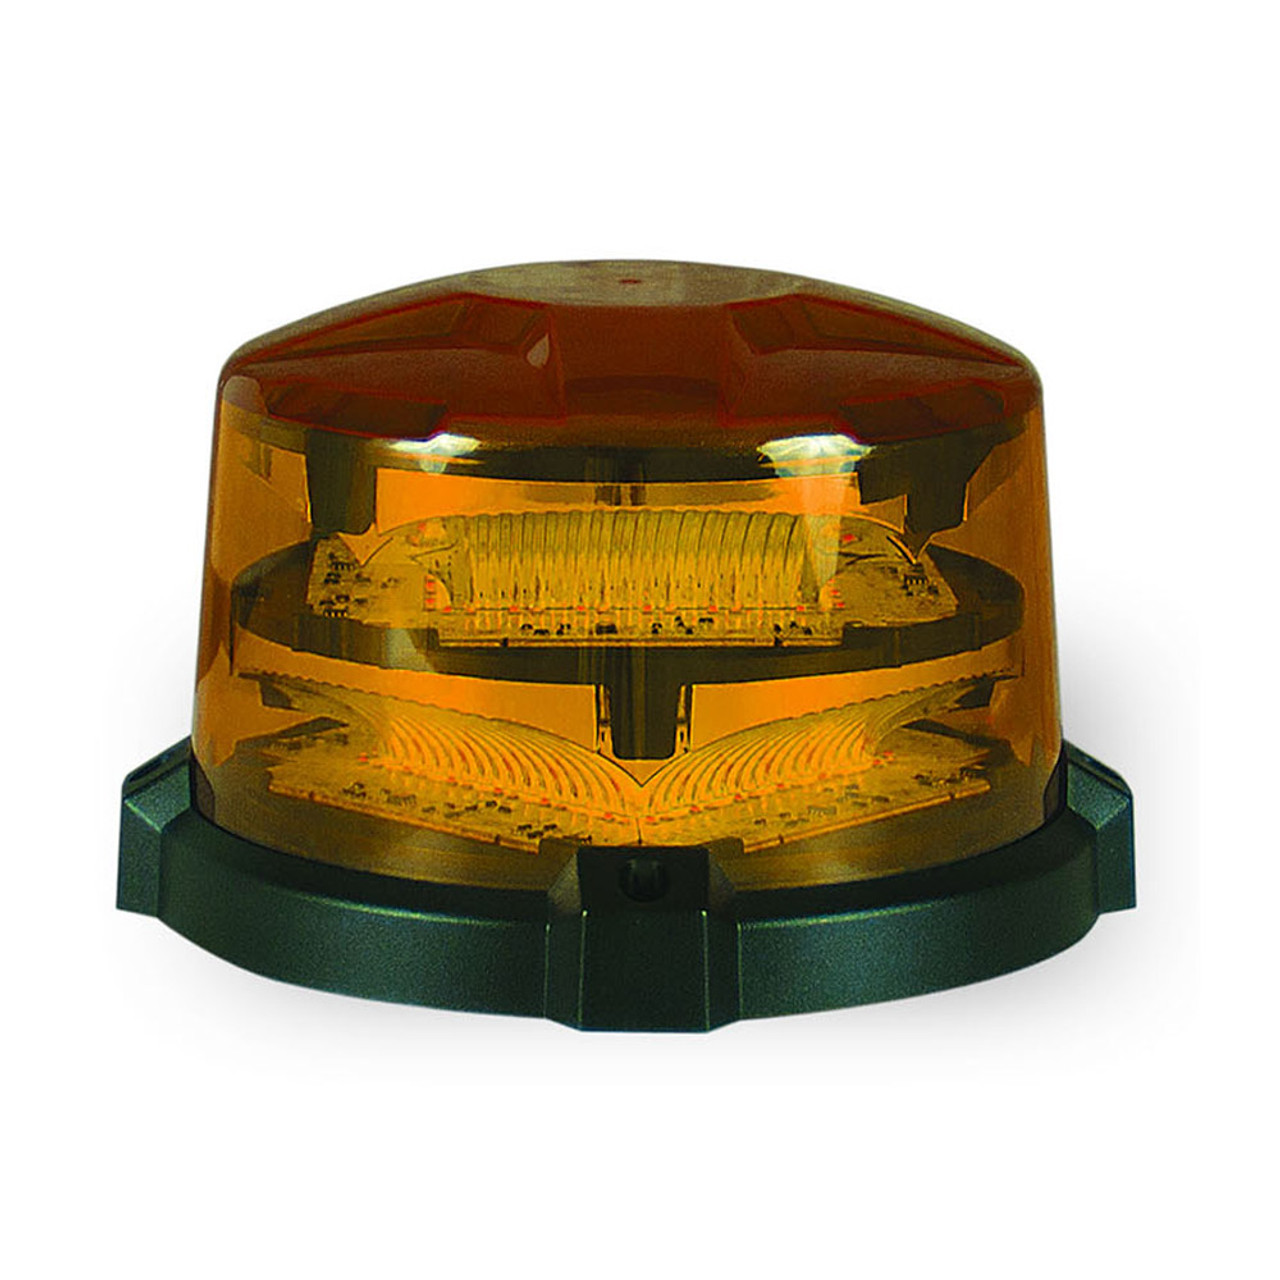 SoundOff nROADS LED Dual Color Beacon, Choose Magnetic or Permanent Mount, High Dome, 6 or 12 LEDs